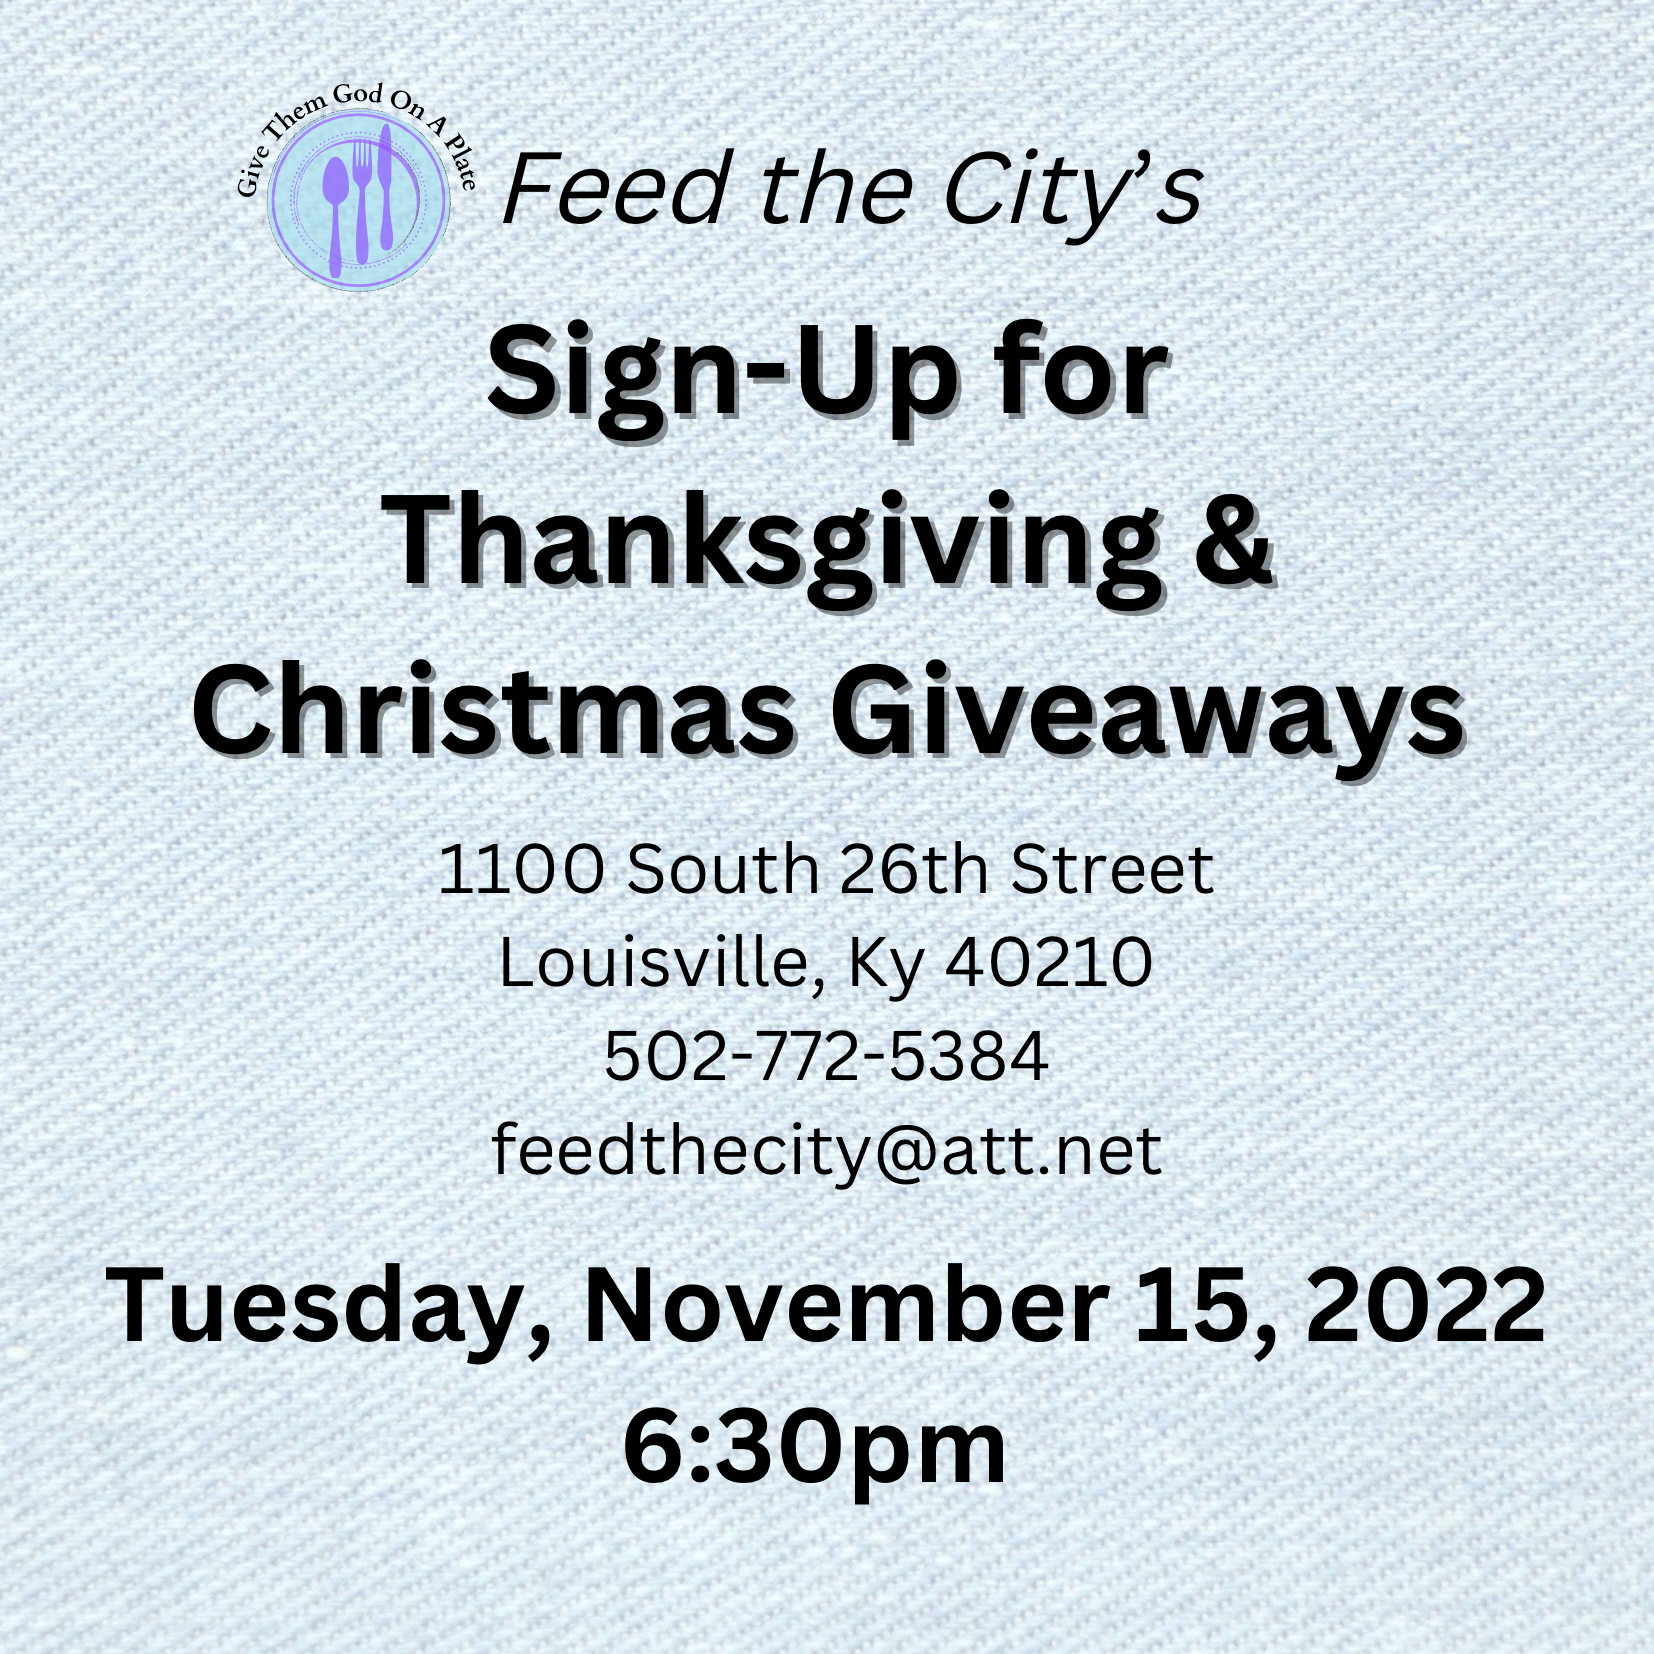 <h1 class="tribe-events-single-event-title">Feed the City’s Sign-Up for Thanksgiving & Christmas Giveaways</h1>